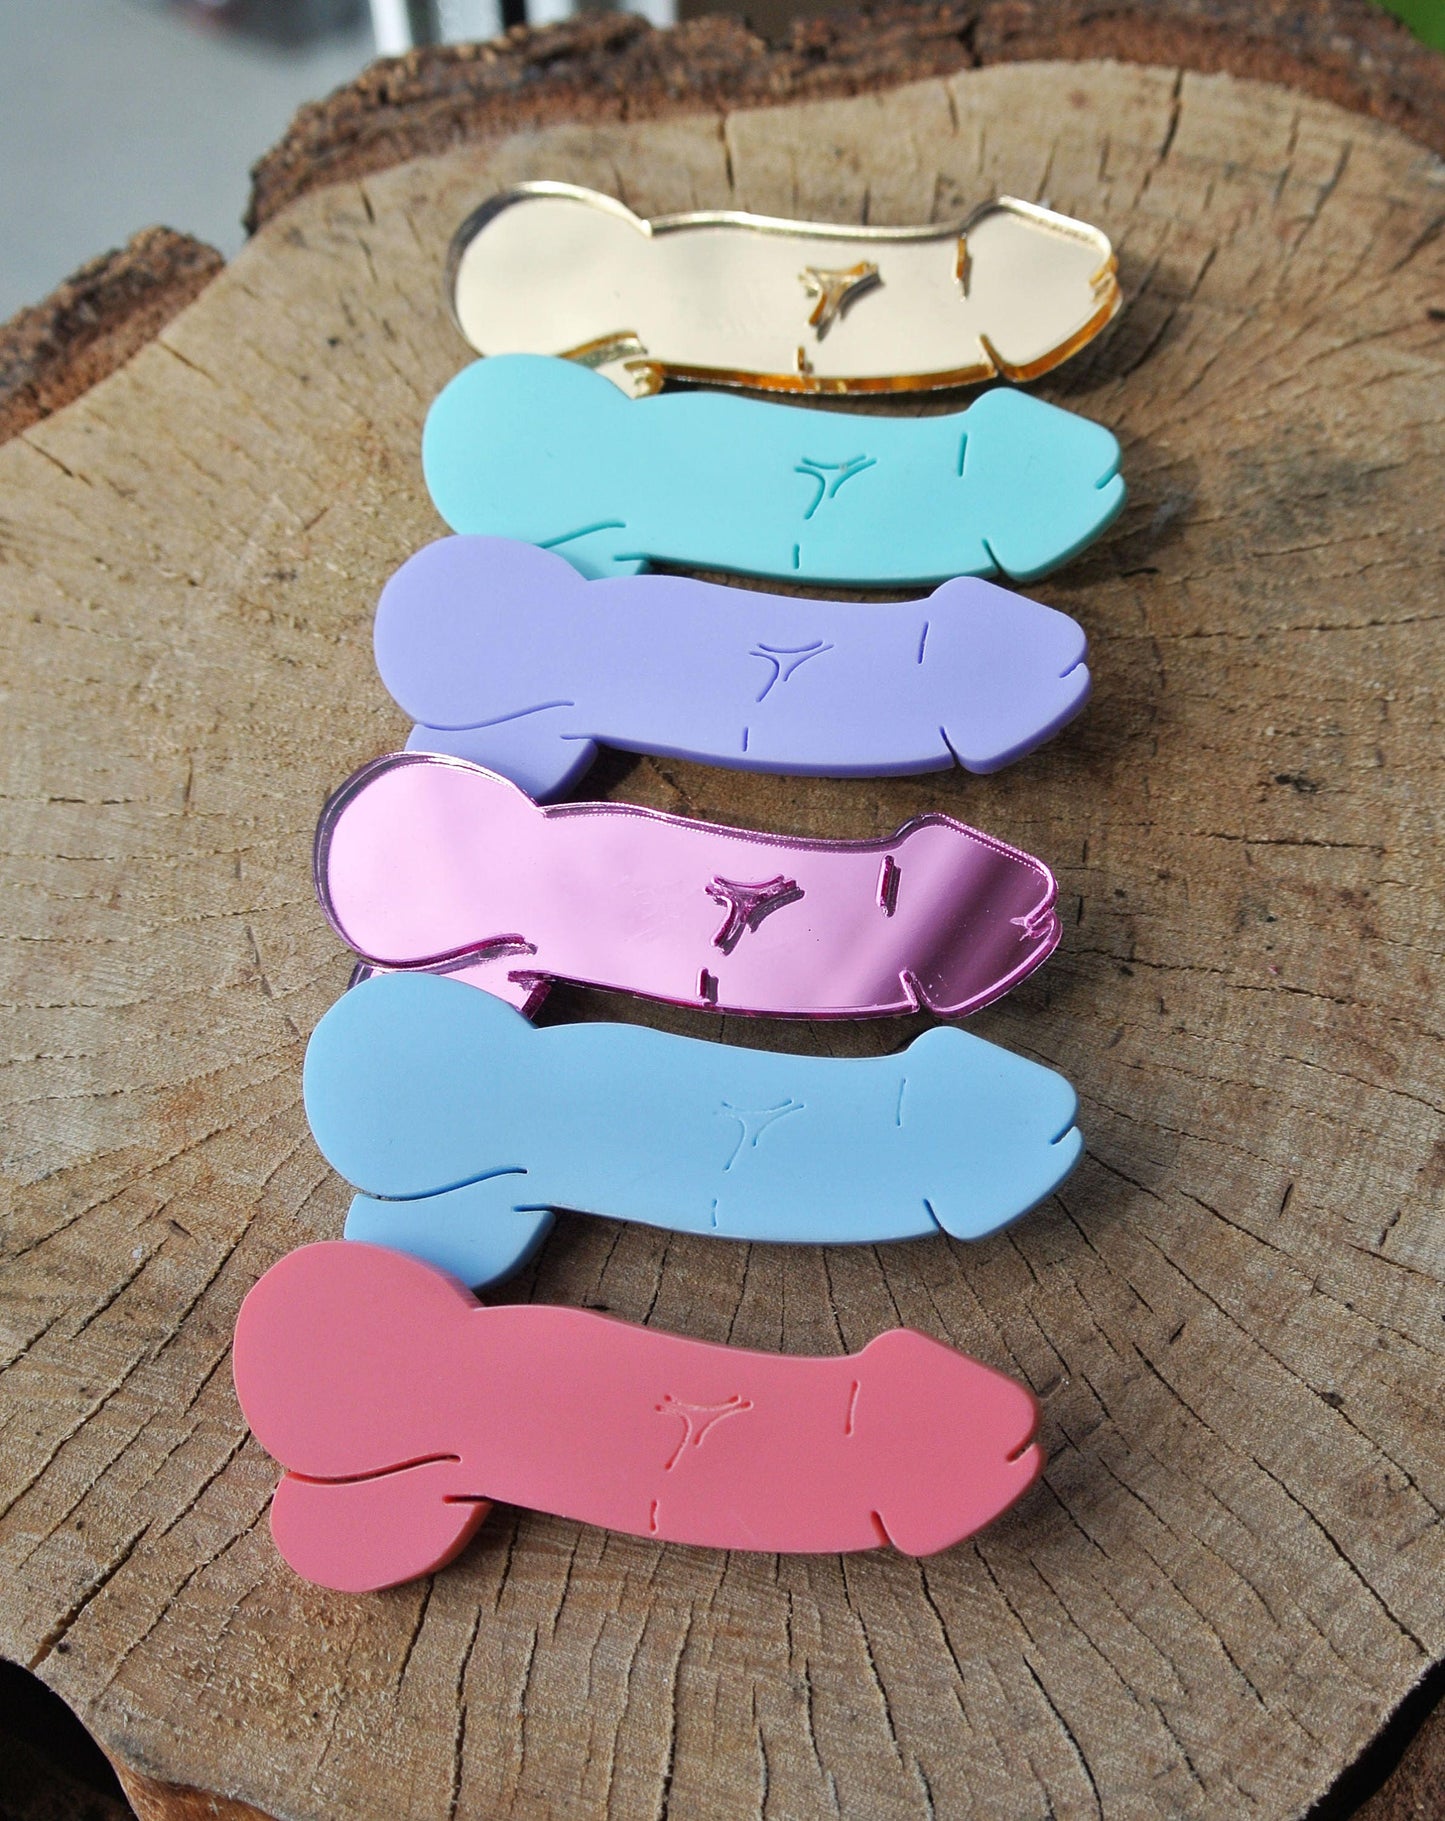 Dick brooch in 6 colours